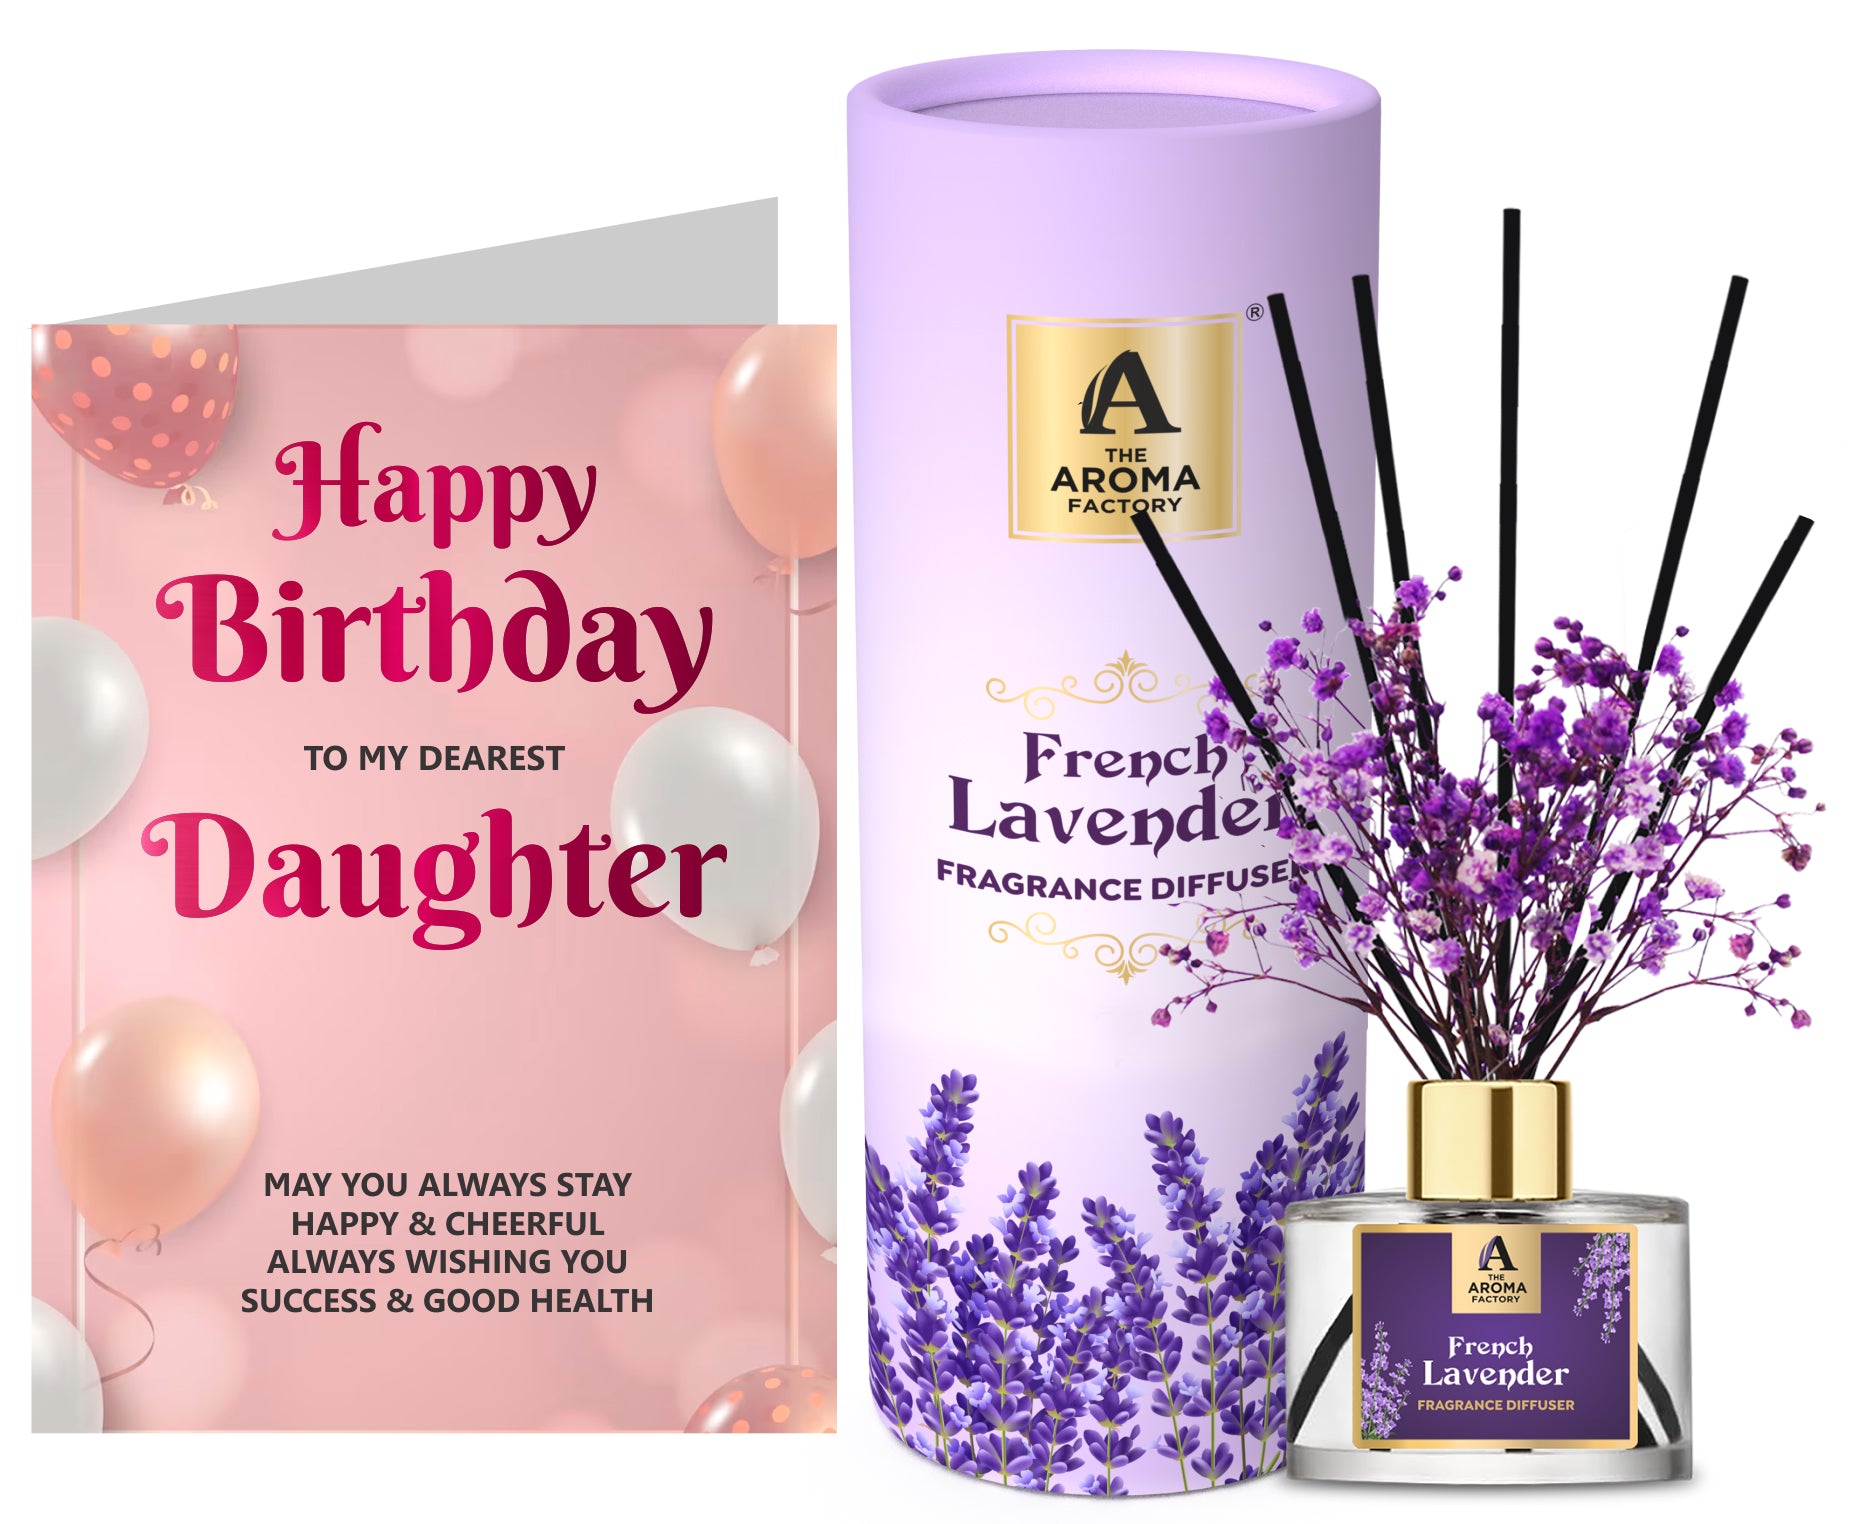 The Aroma Factory Happy Birthday Gift for Daughter/Beti with Card, French Lavender Fragrance Reed Diffuser Set (1 Box + 1 Card)